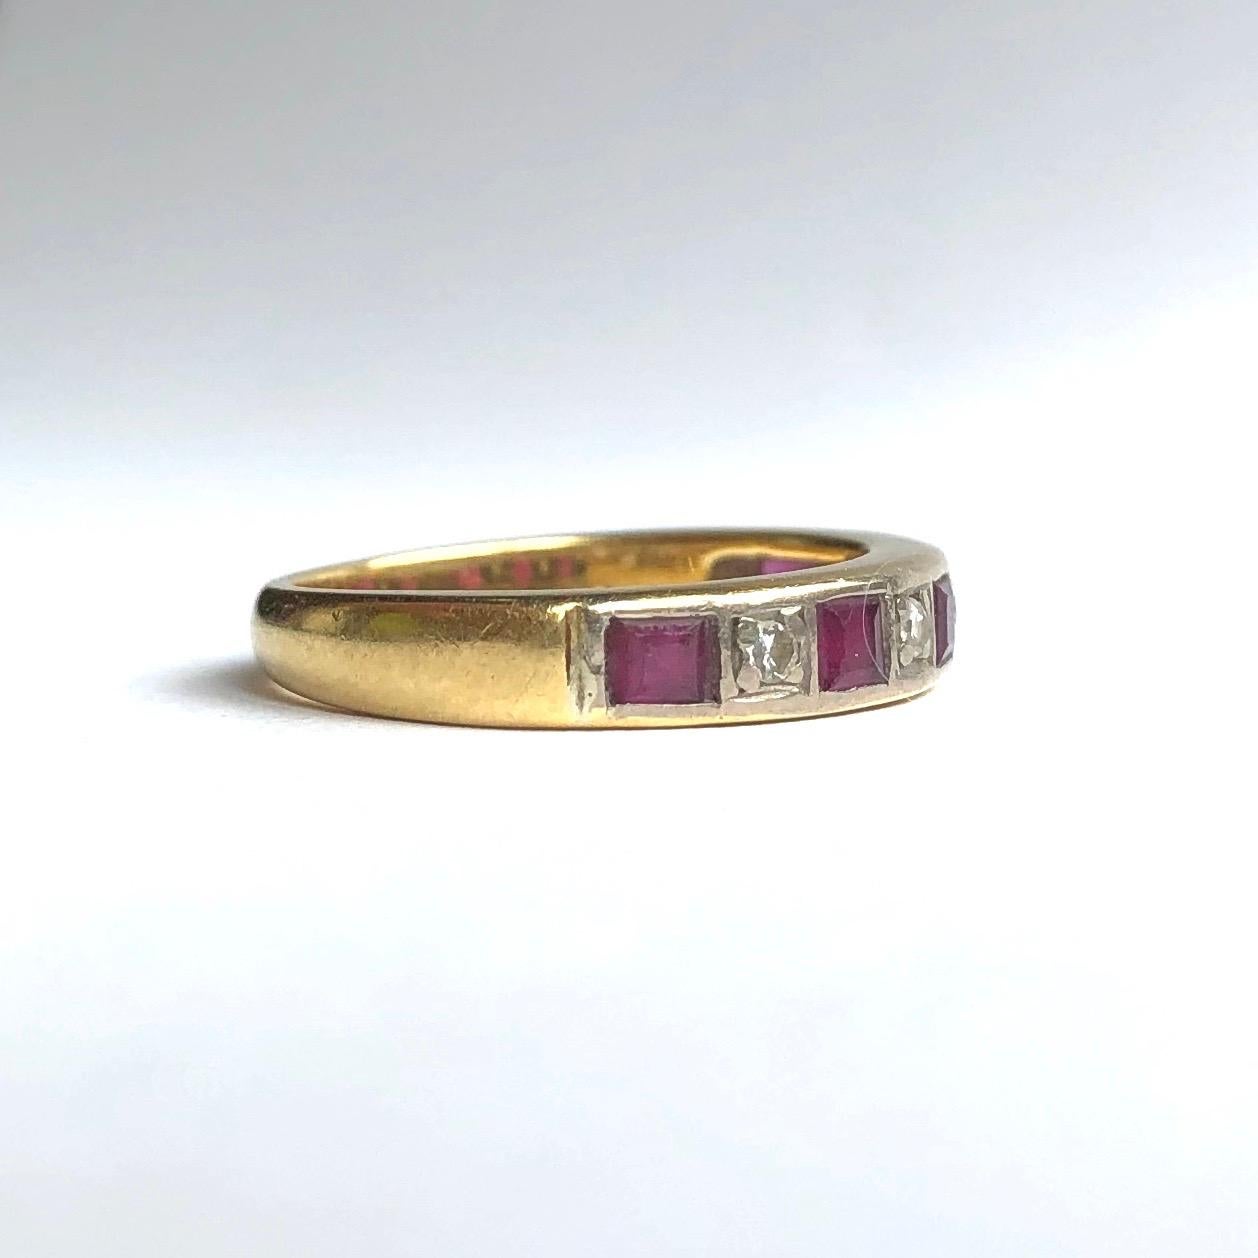 This half eternity band holds five rich red square rubies totalling 10pts  and in between these stones are diamonds measuring a total of approx 15pts. The band is modelled in 18ct gold and made in Birmingham, England. 

Ring Size: J or 4 3/4
Band